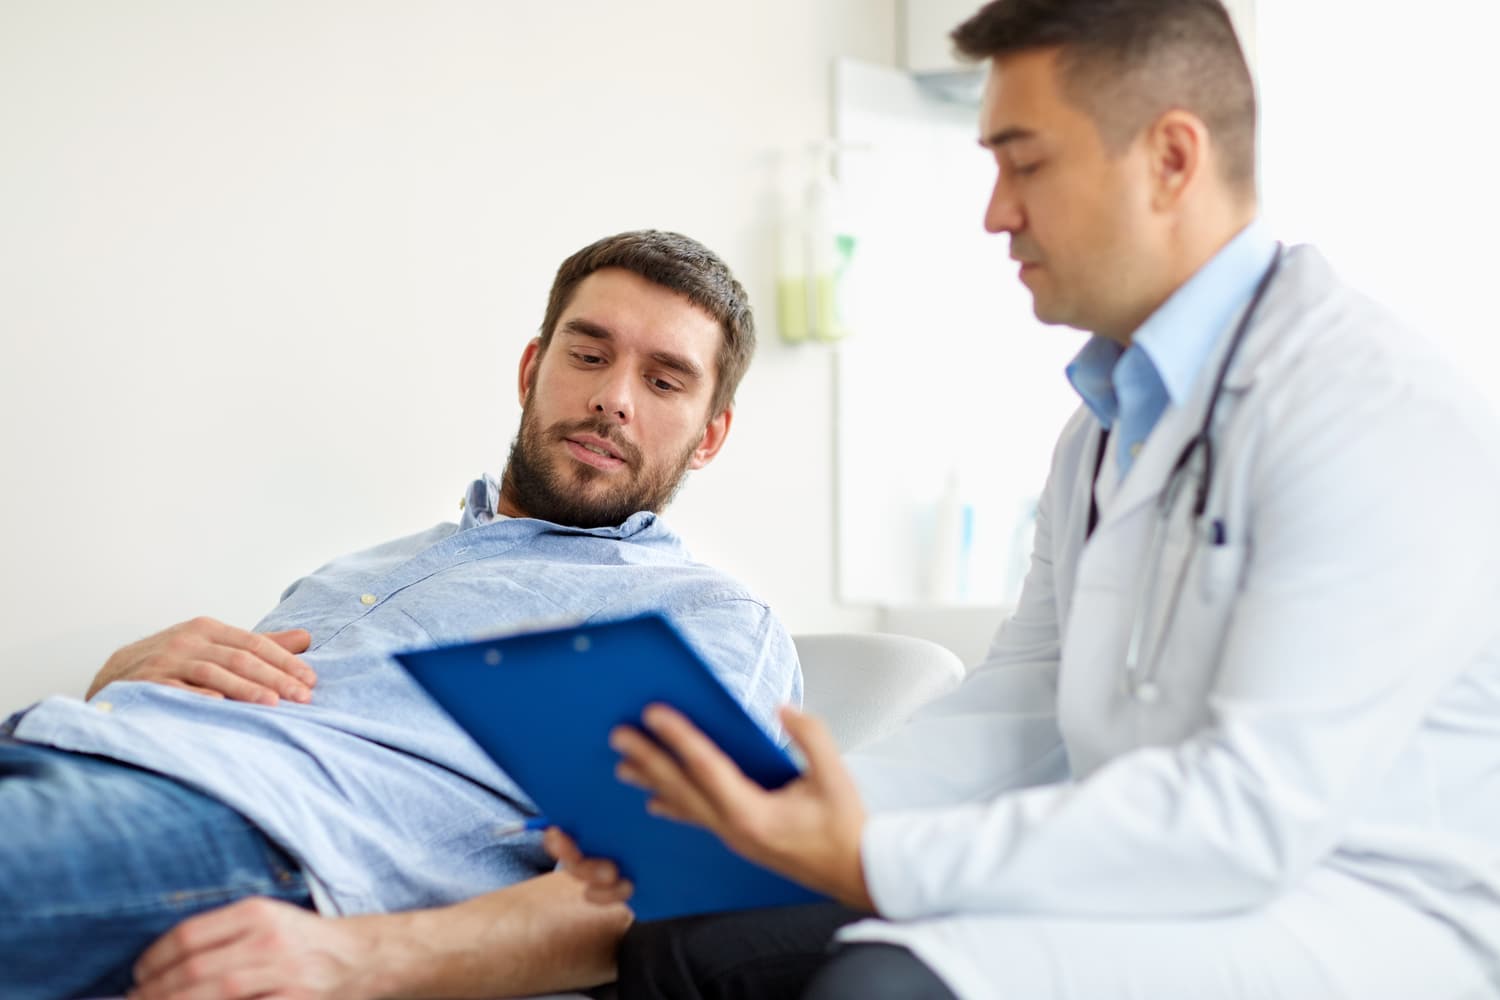 How Do I Prepare for an “Independent Medical Examination?”